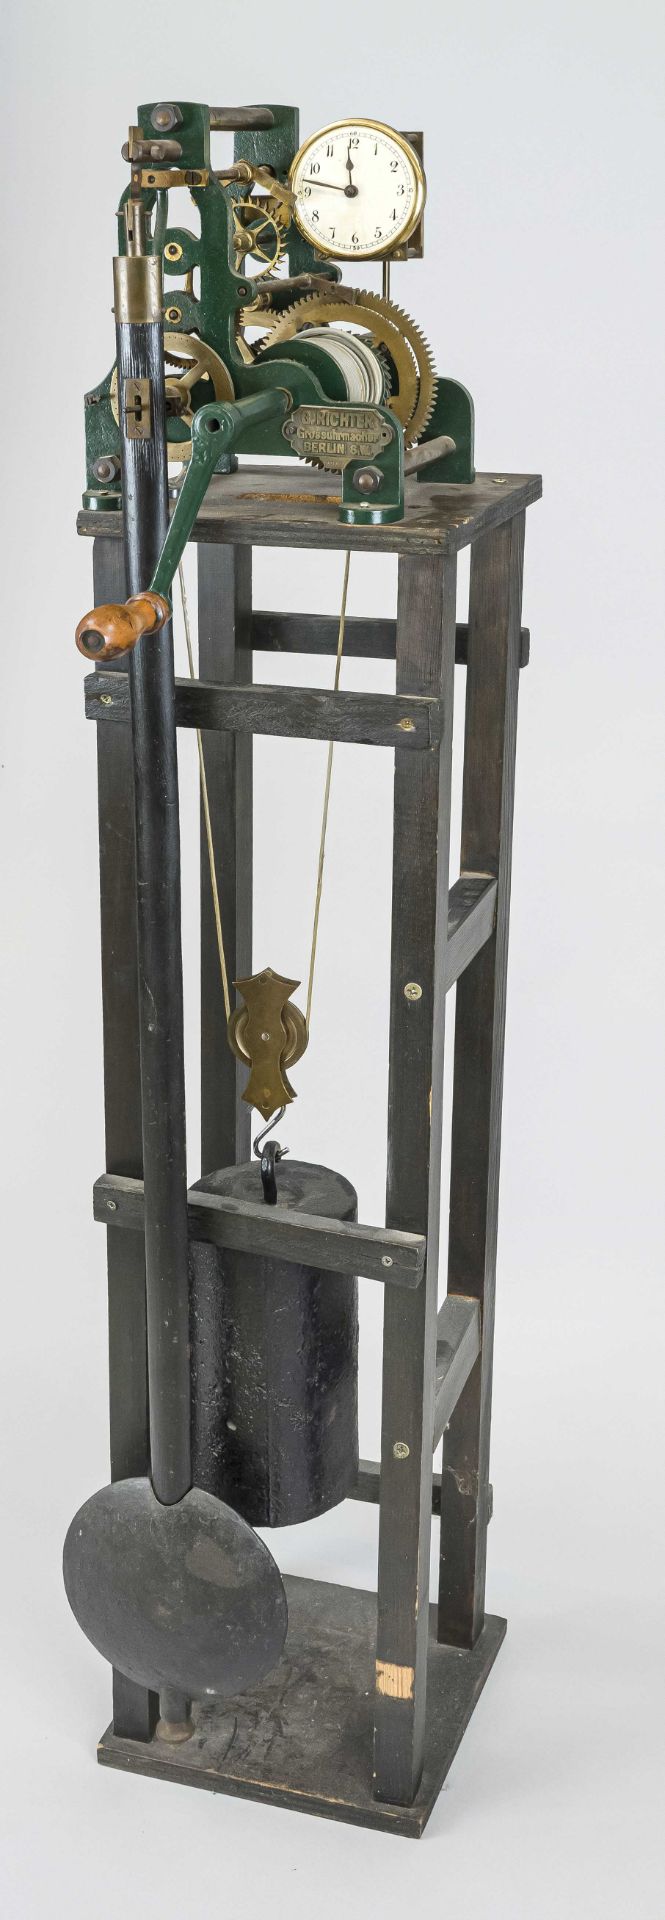 Tower clock marked ''G.Richter Grossuhrmacher Berlin S.W.'' 2nd half 19th century, with small - Image 2 of 2